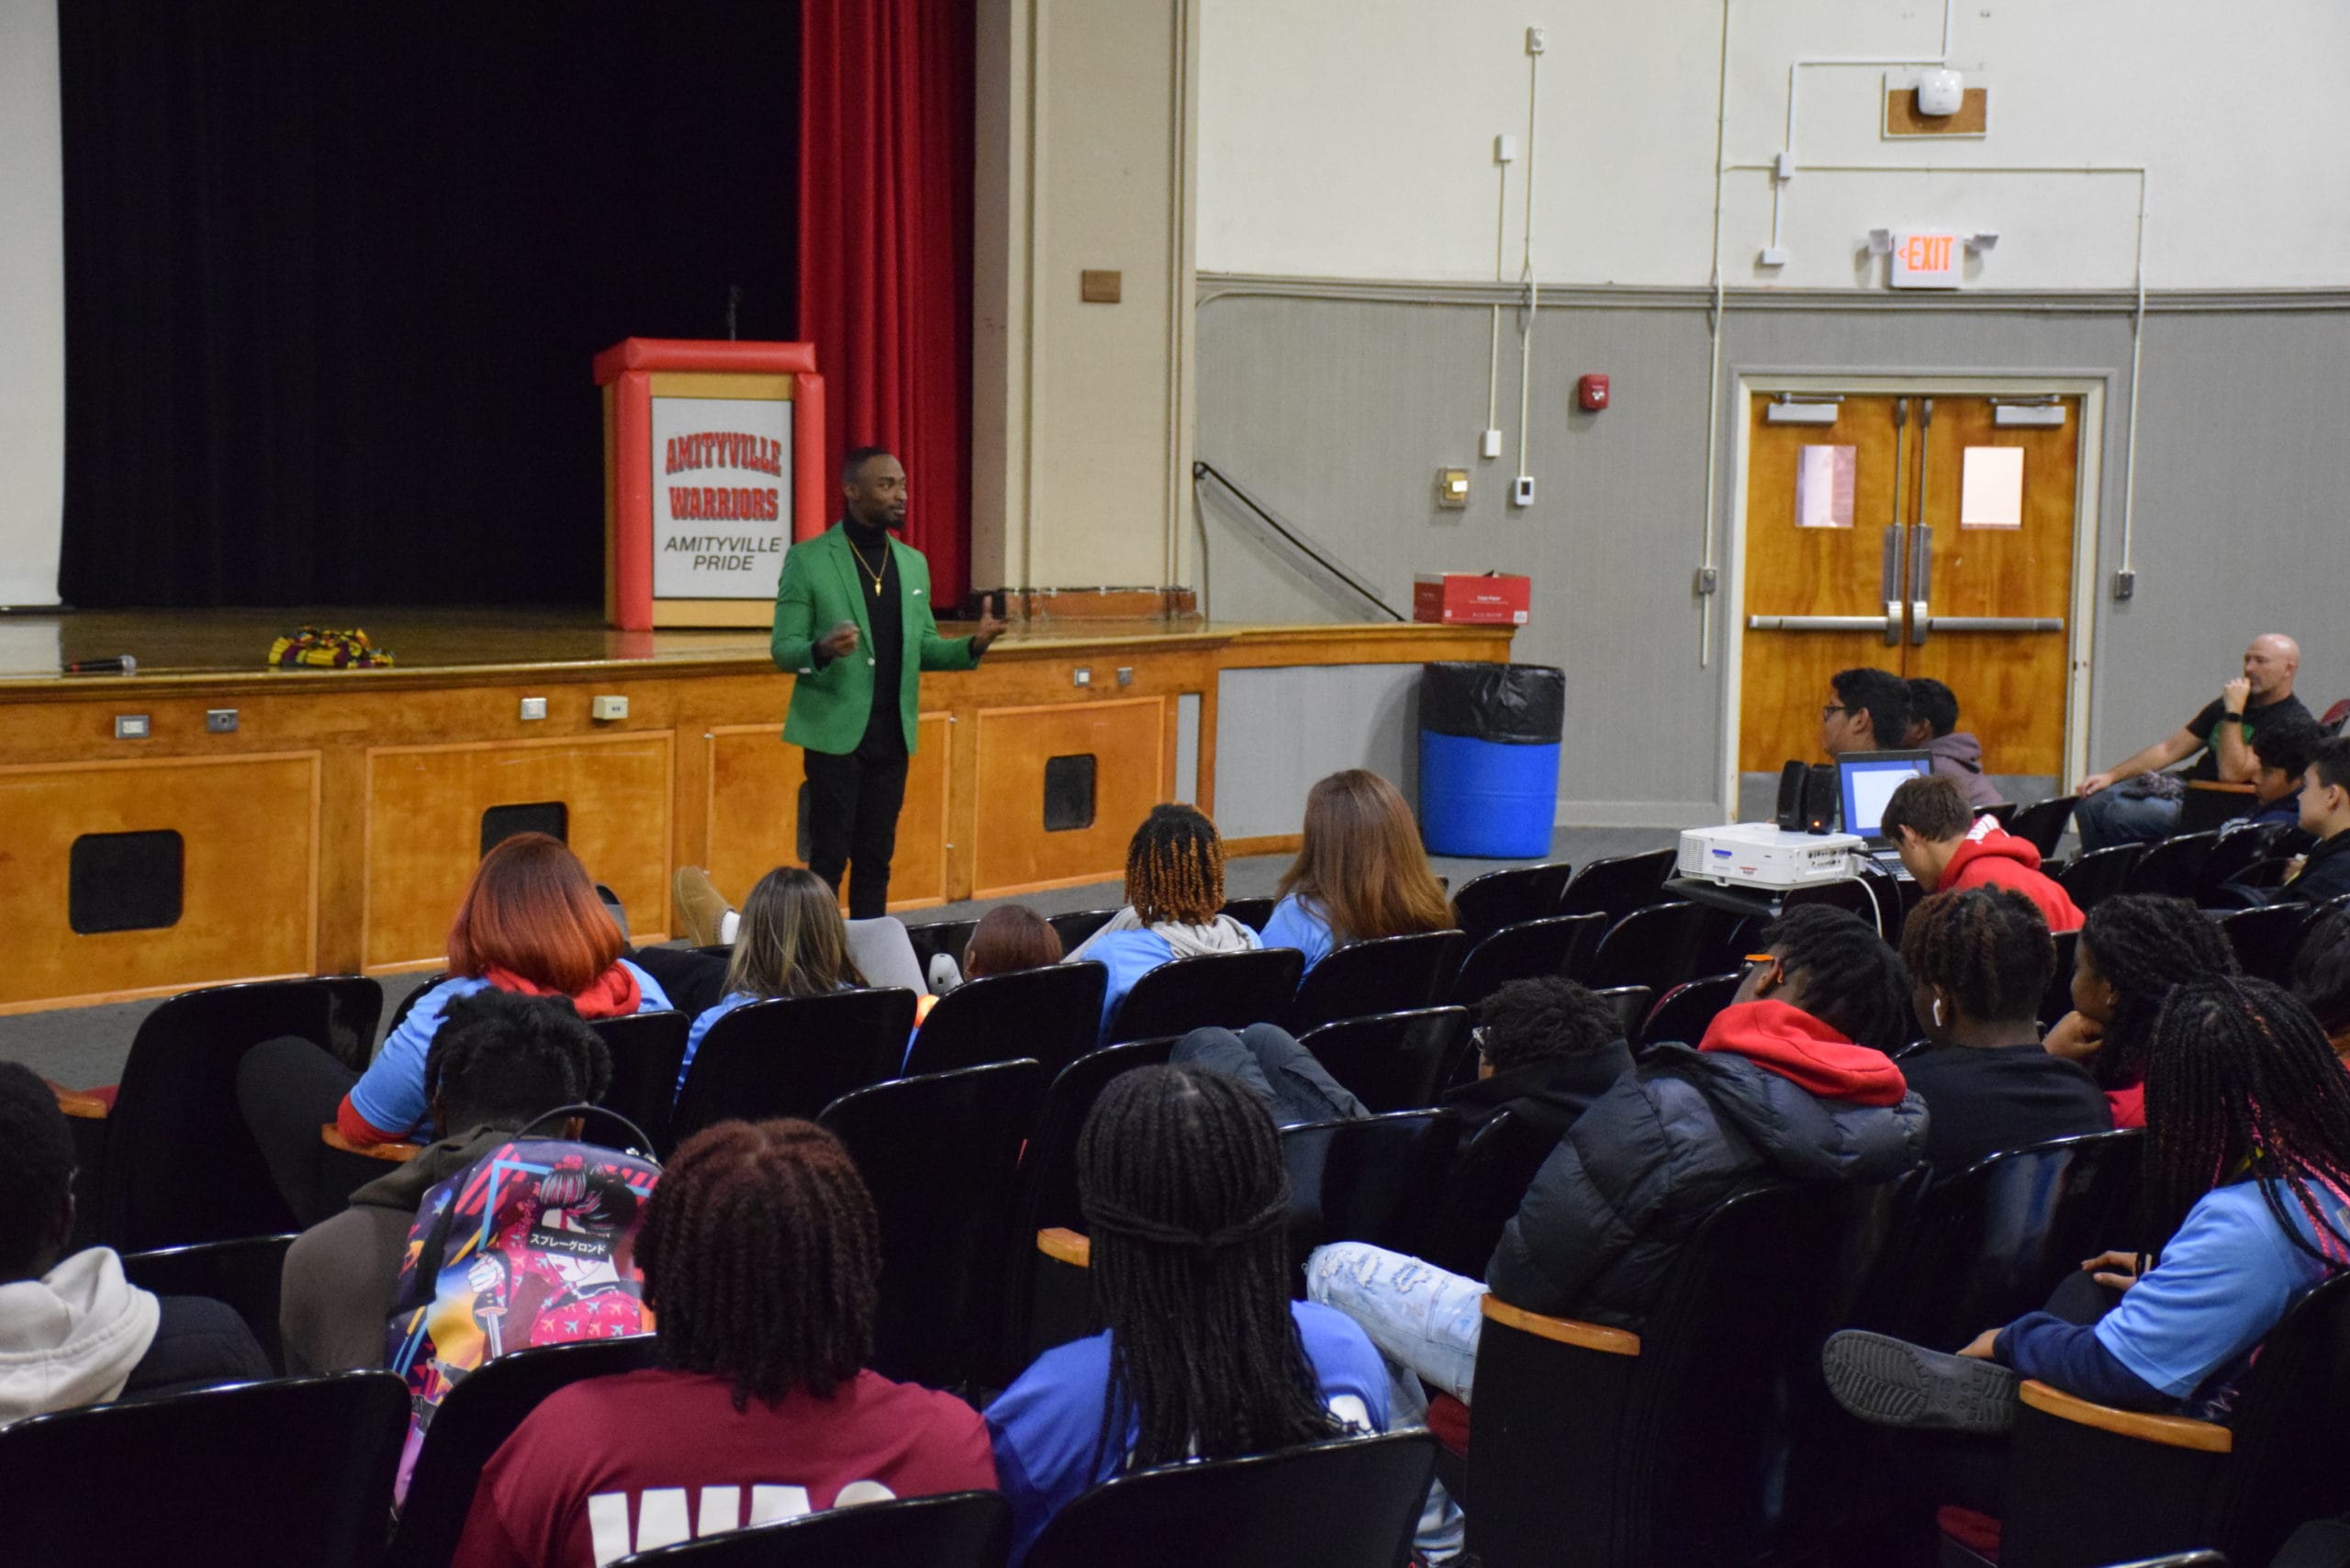 Awareness Weekend Brings Students Together At Amityville High School